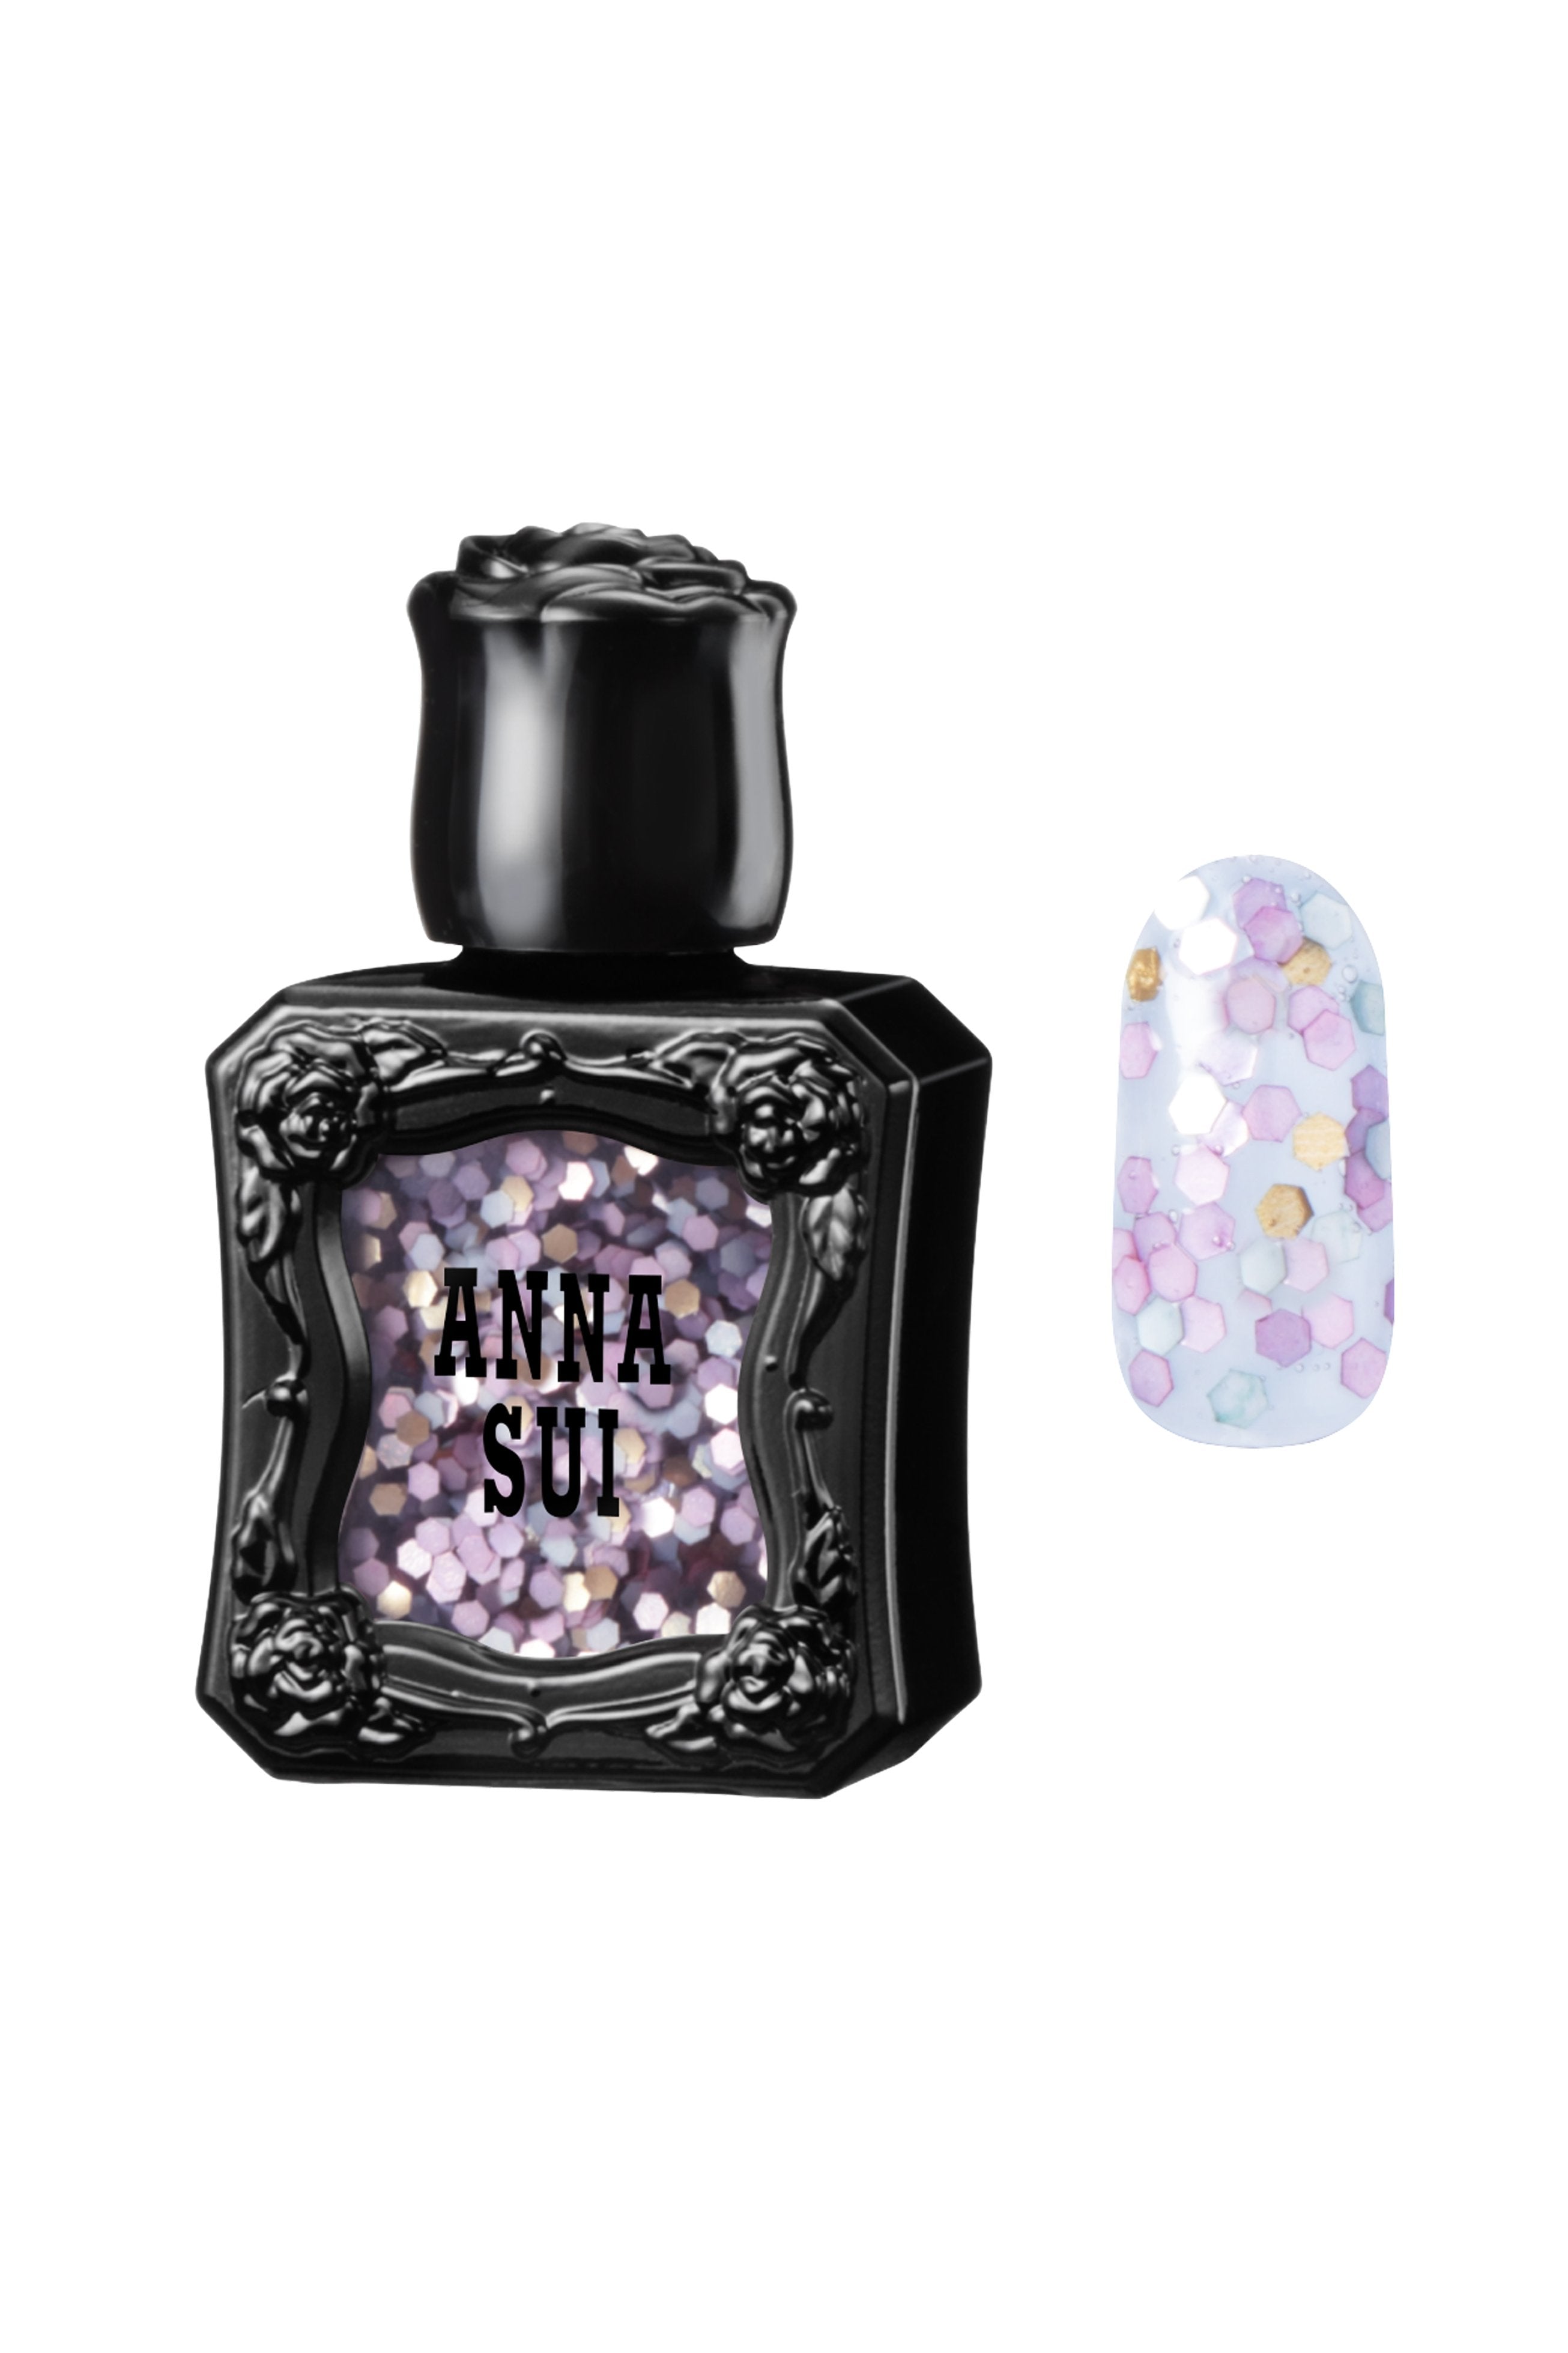 Inspired by the fragrance bottle, black container with raised rose pattern, Anna Sui on Mermaid Purple